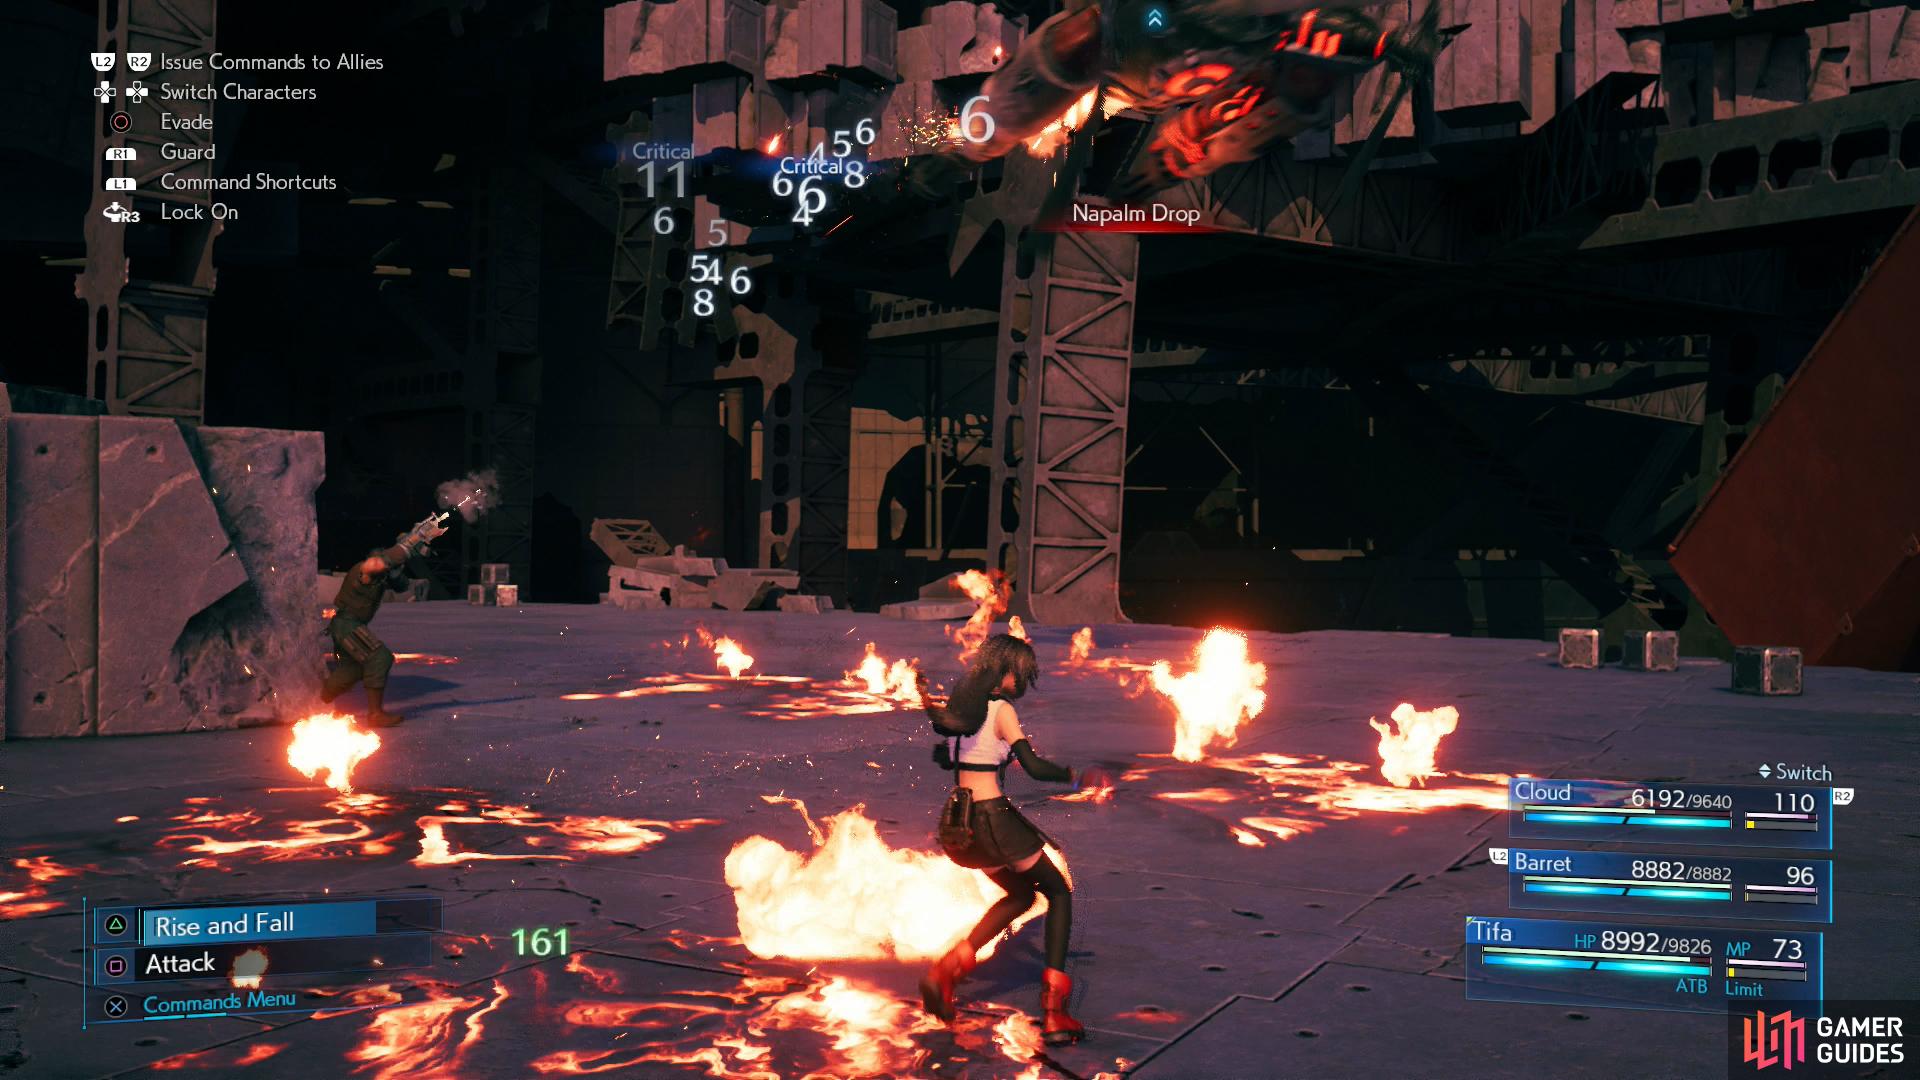 Many of The Valkyrie's attacks can be mitigated with Fire + Elemental.